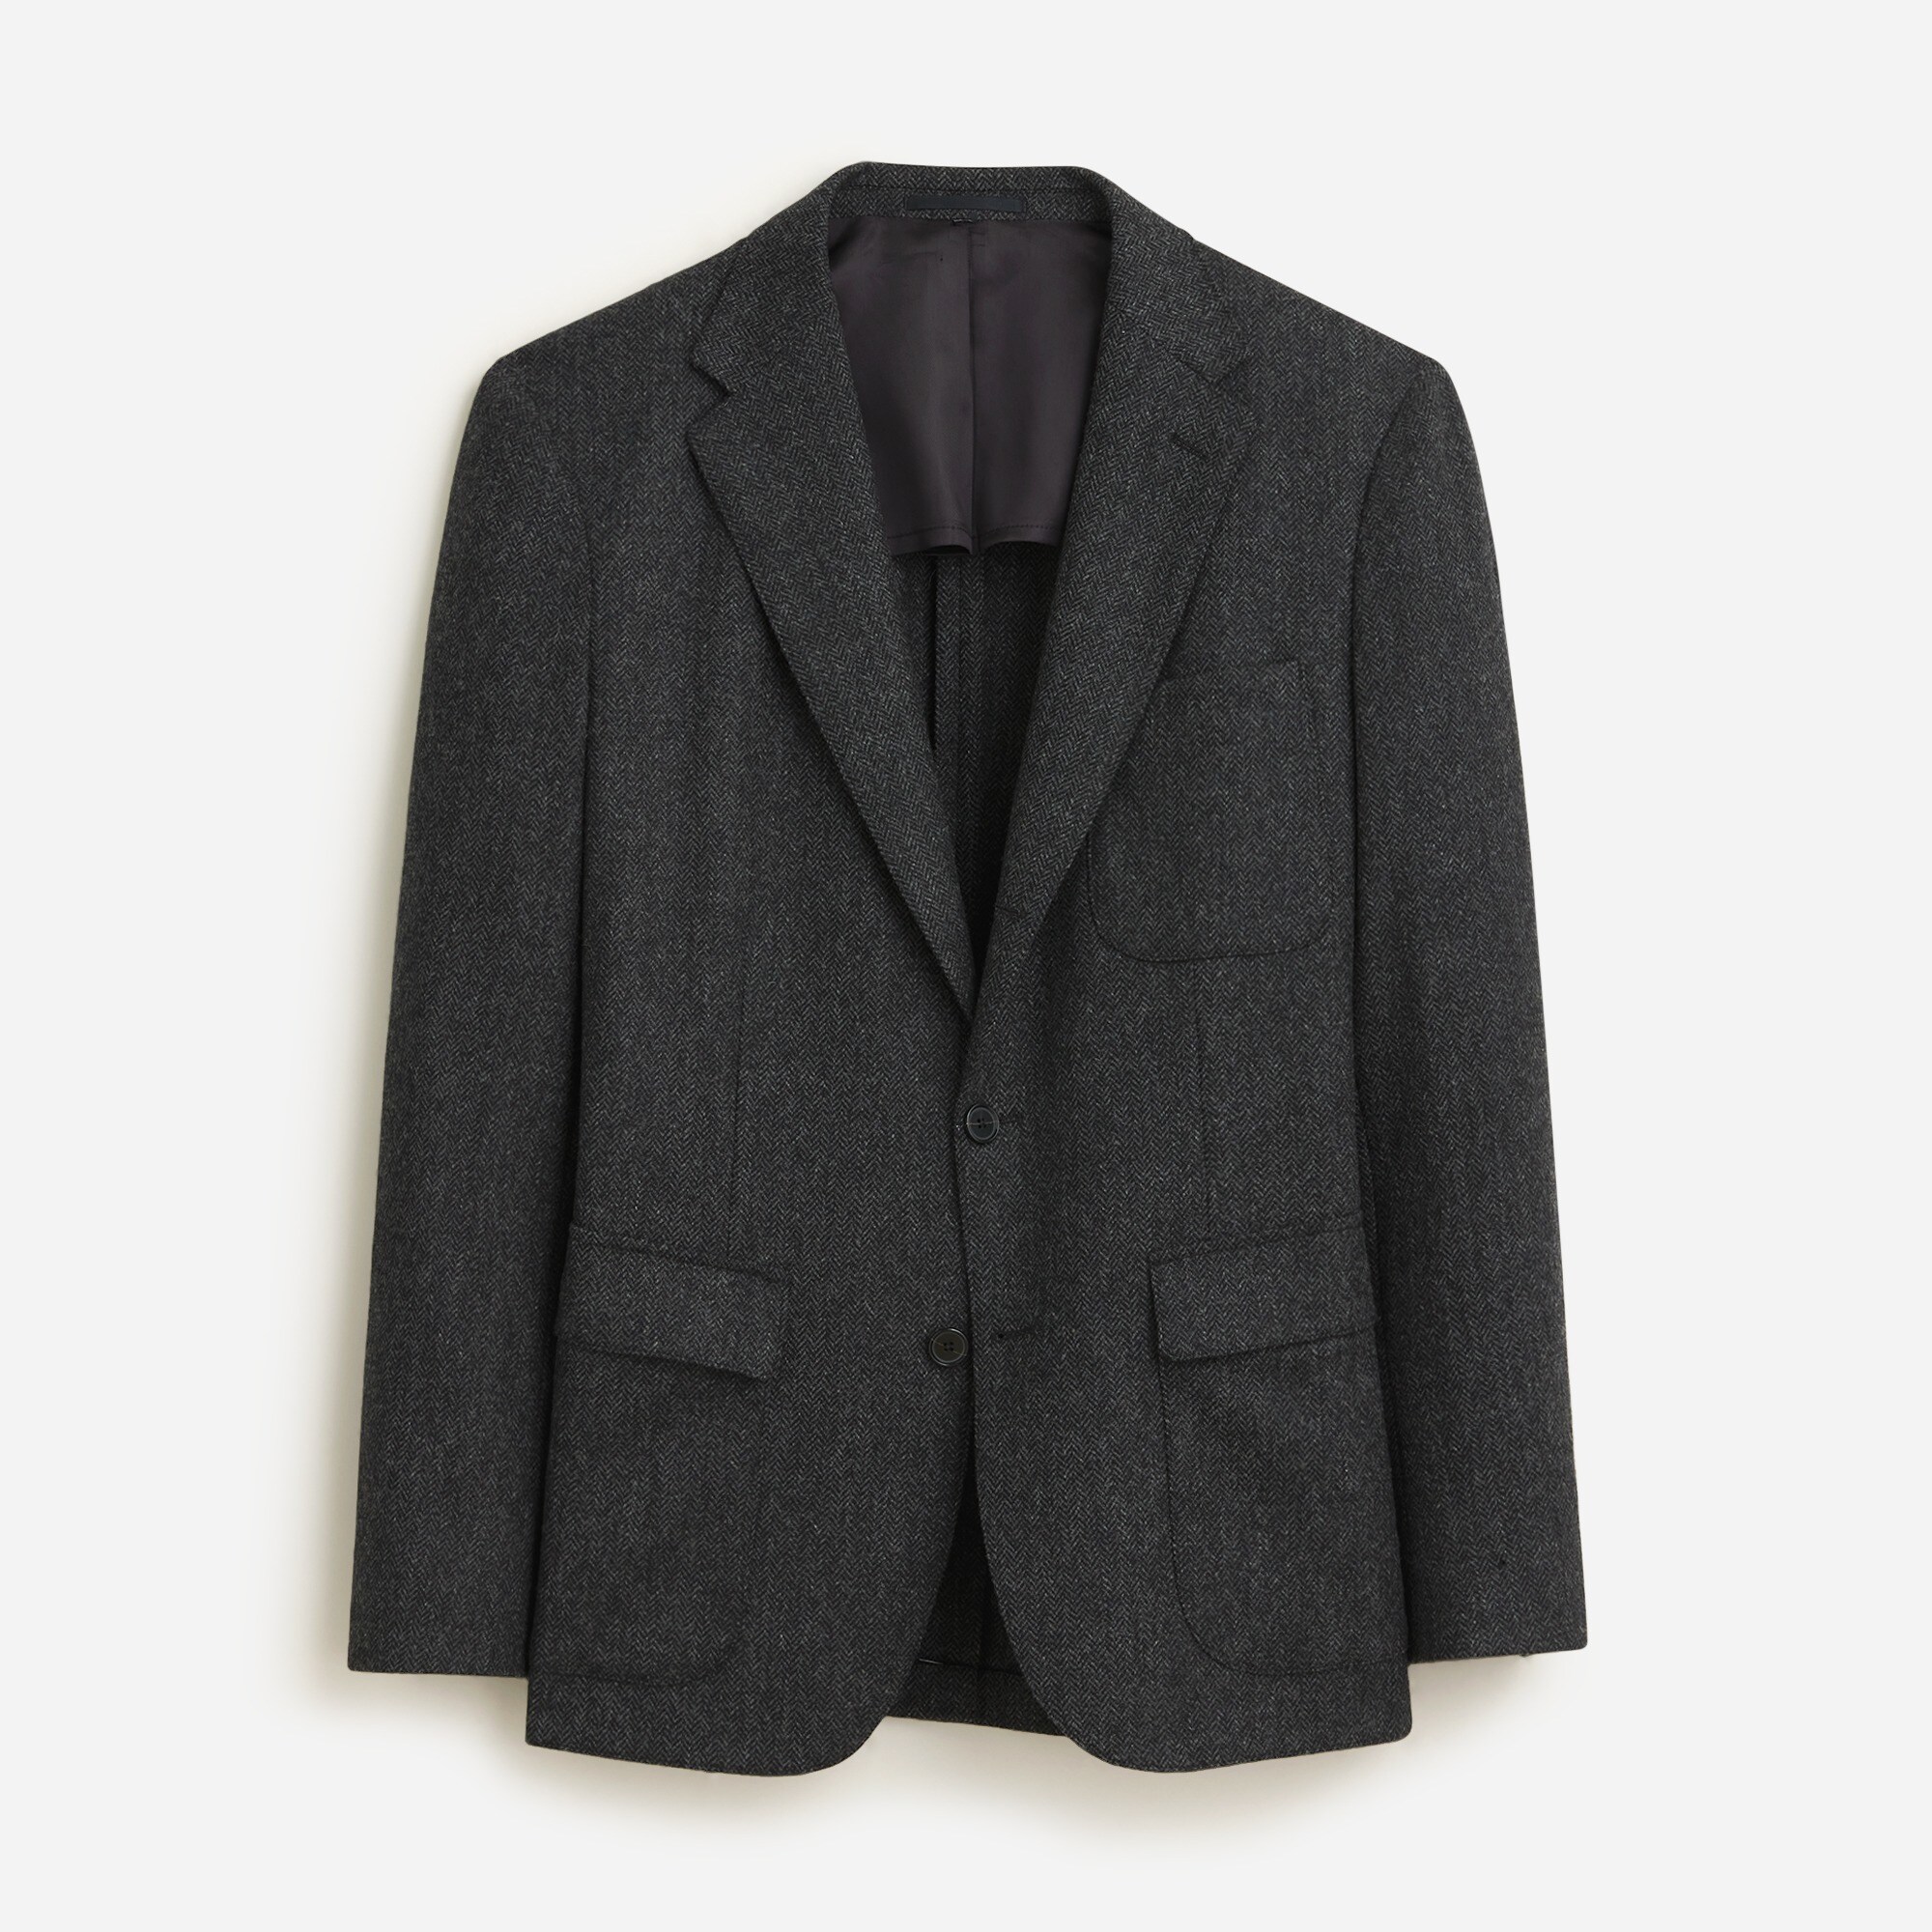  Crosby Classic-fit suit jacket in English merino lambswool